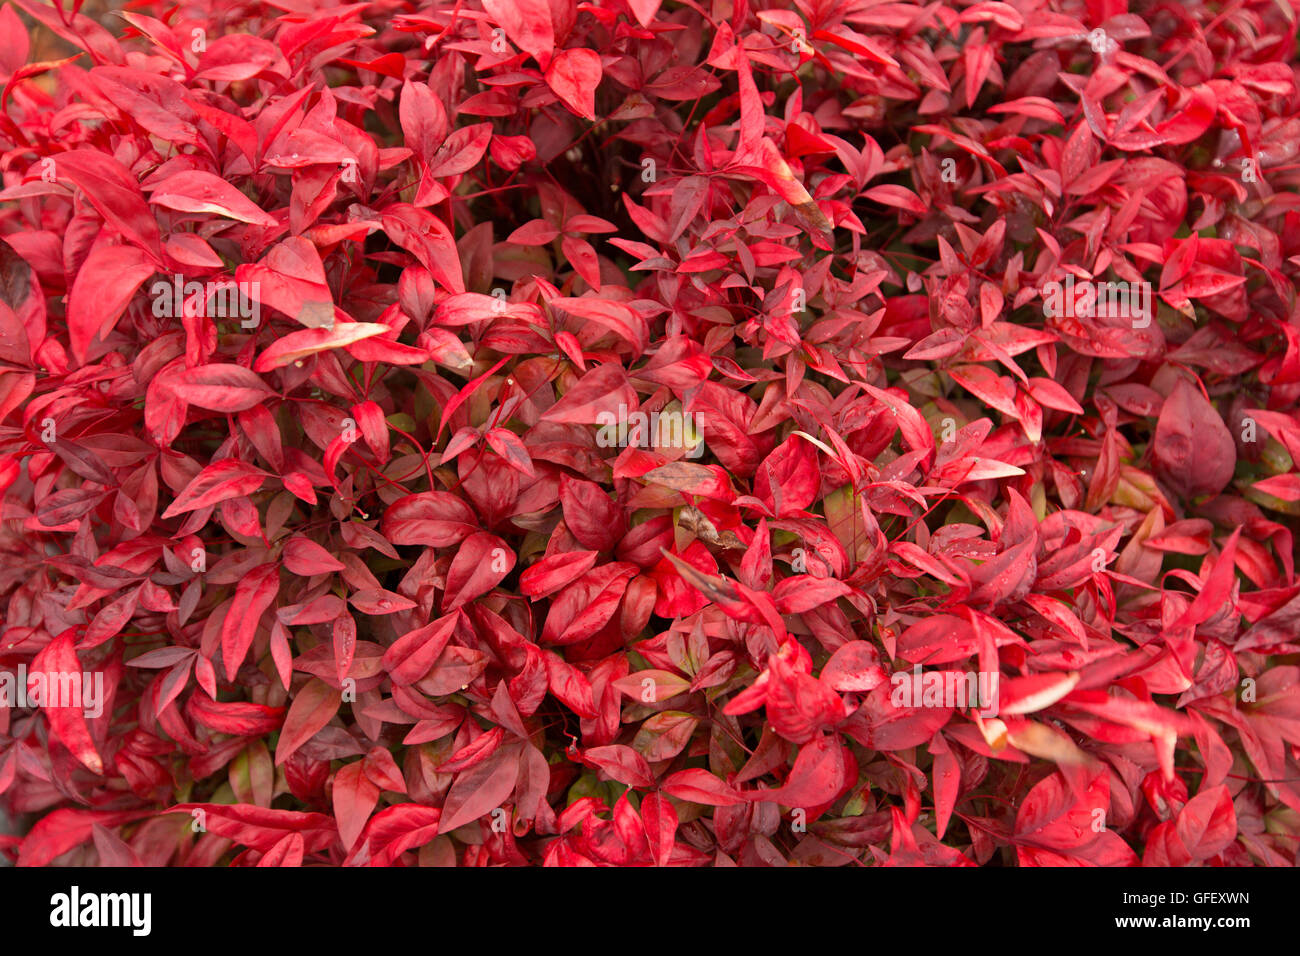 Mass of spectacular vivid red leaves of Nandina domestica, a low growing garden shrub known as sacred bamboo. Stock Photo